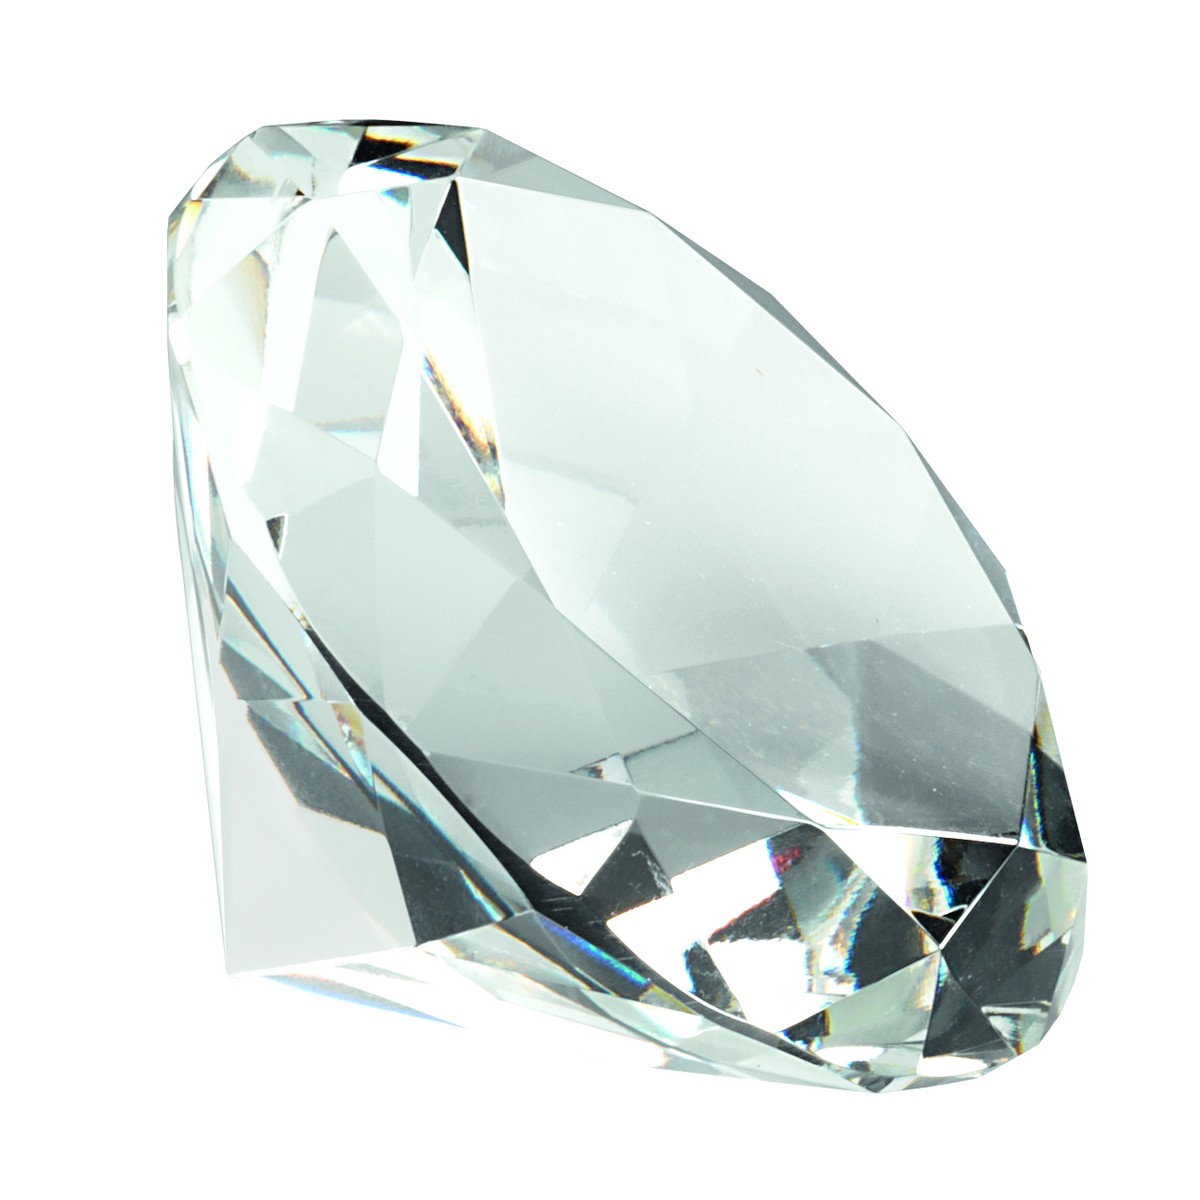 CLEAR GLASS DIAMOND SHAPED PAPERWEIGHT IN BOX